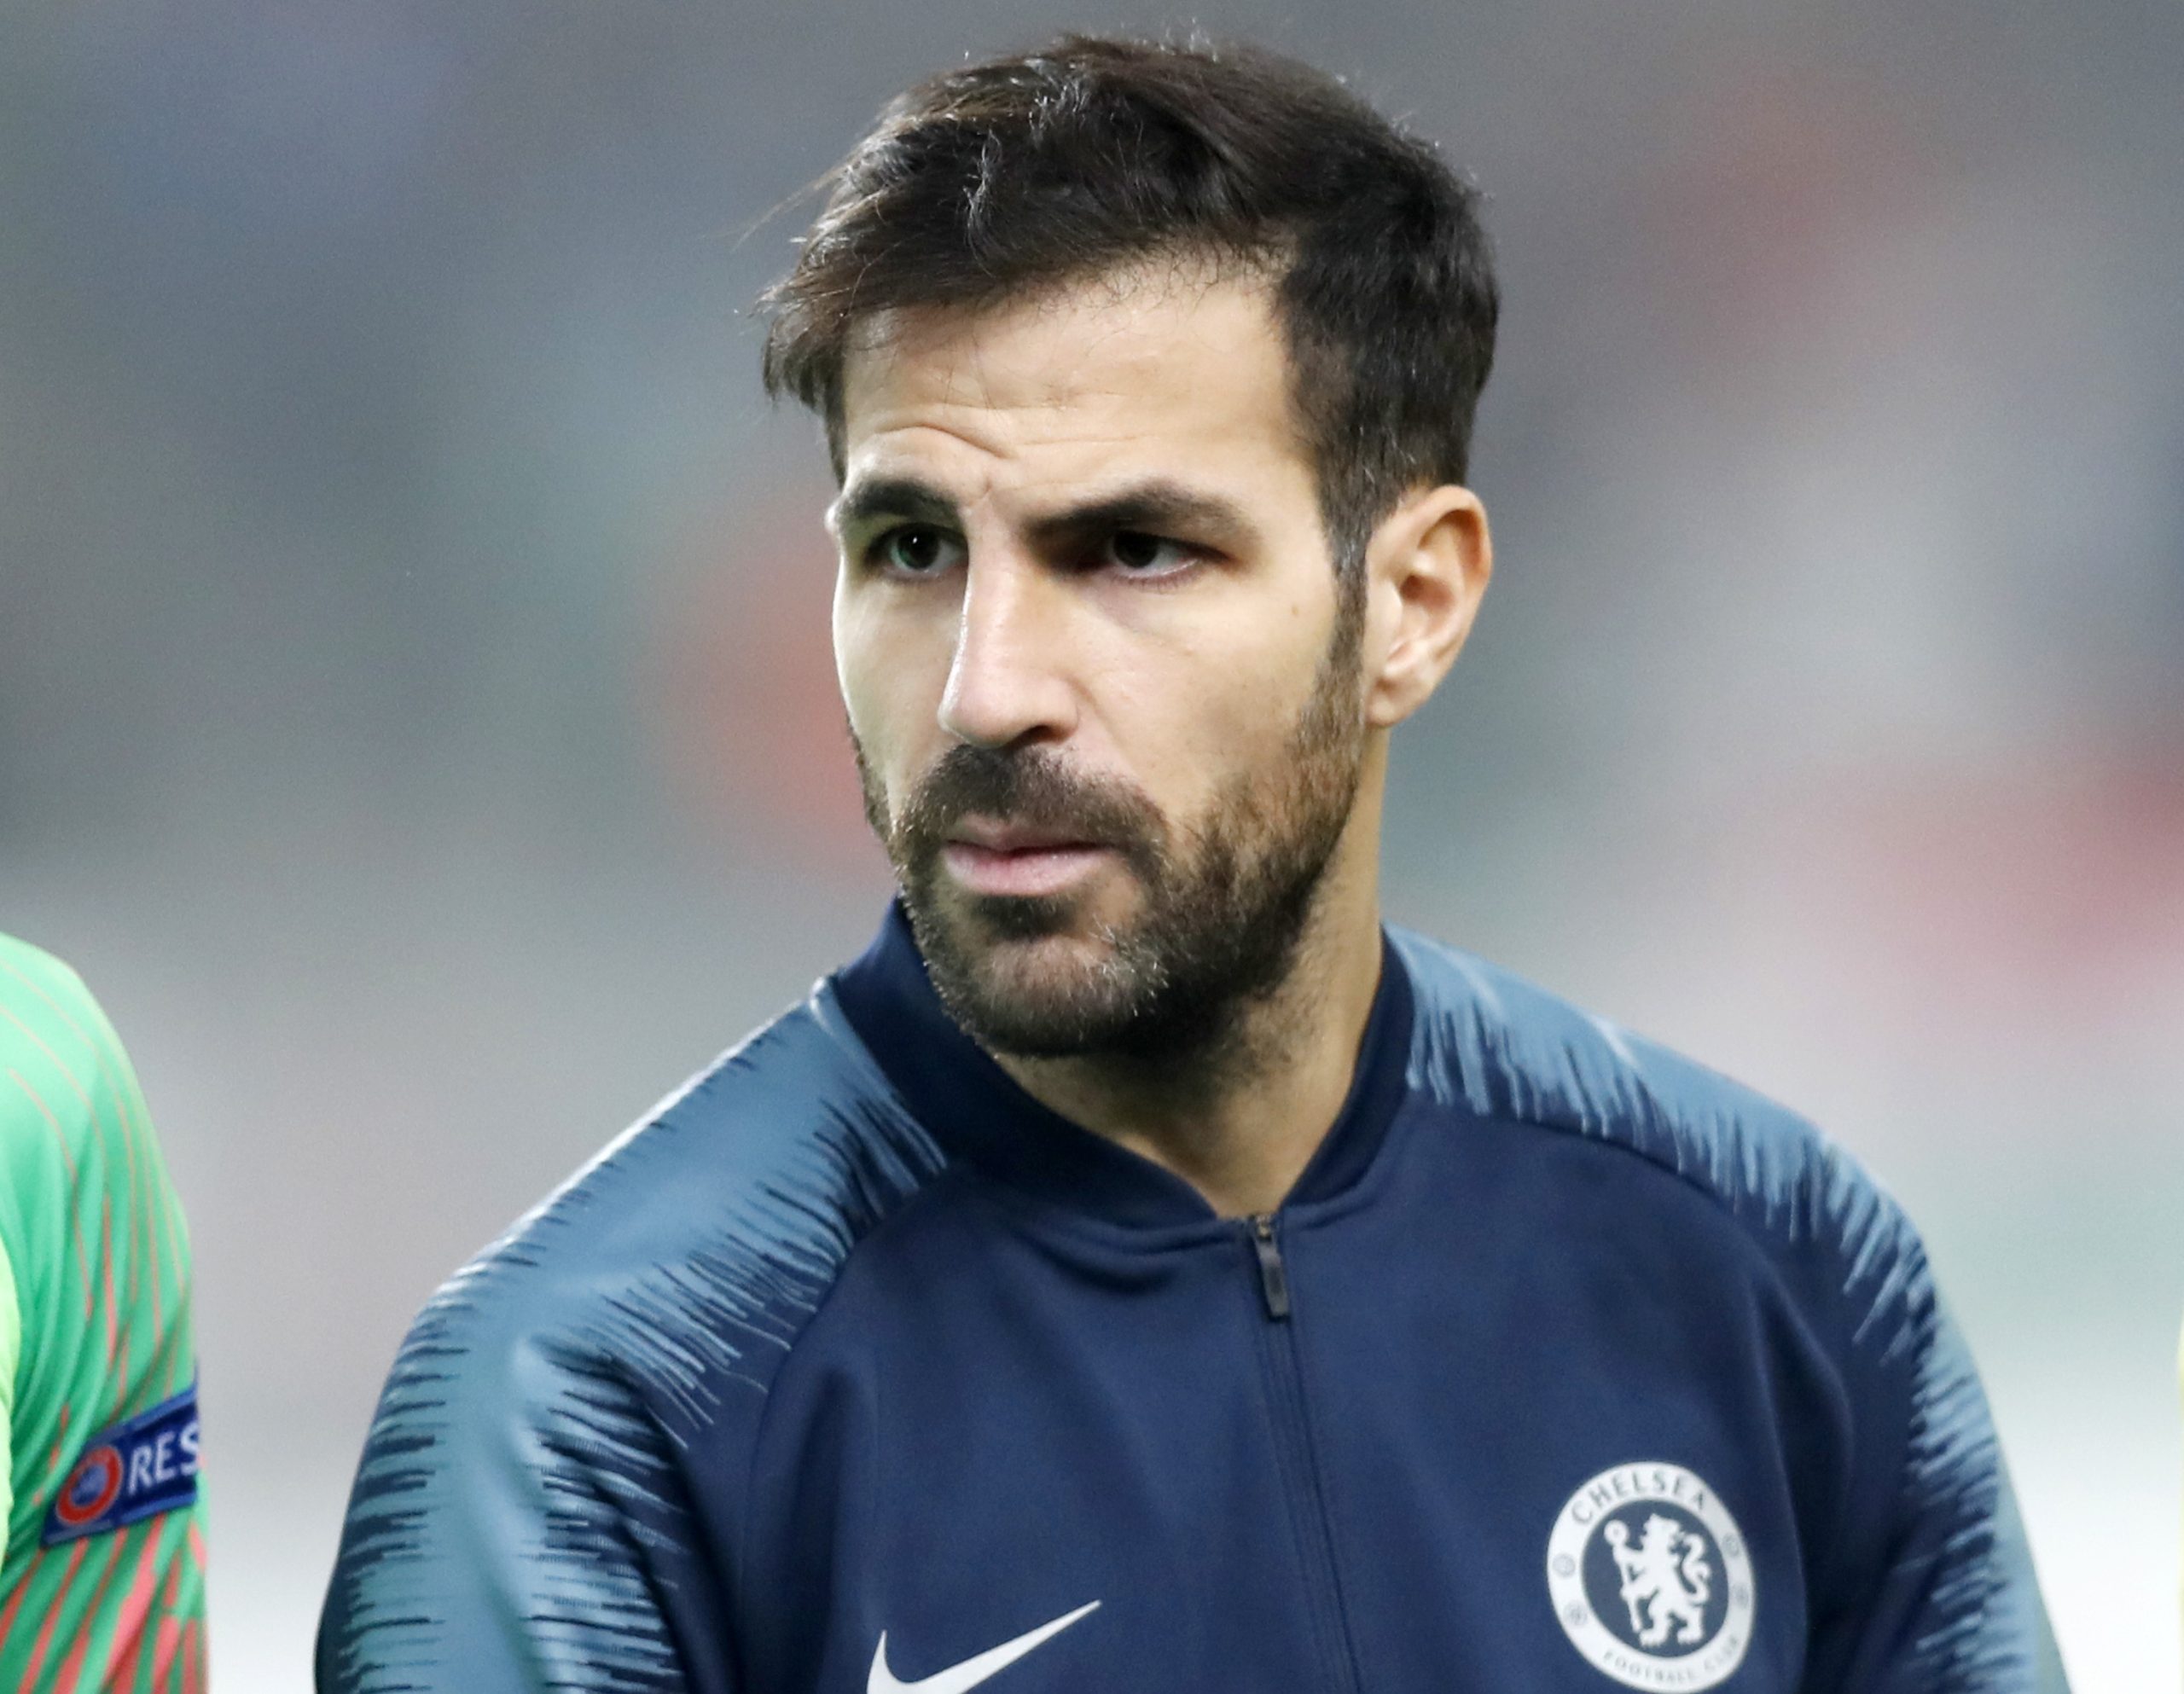 Former Chelsea man Cesc Fabregas lauds positive form of the club in recent weeks